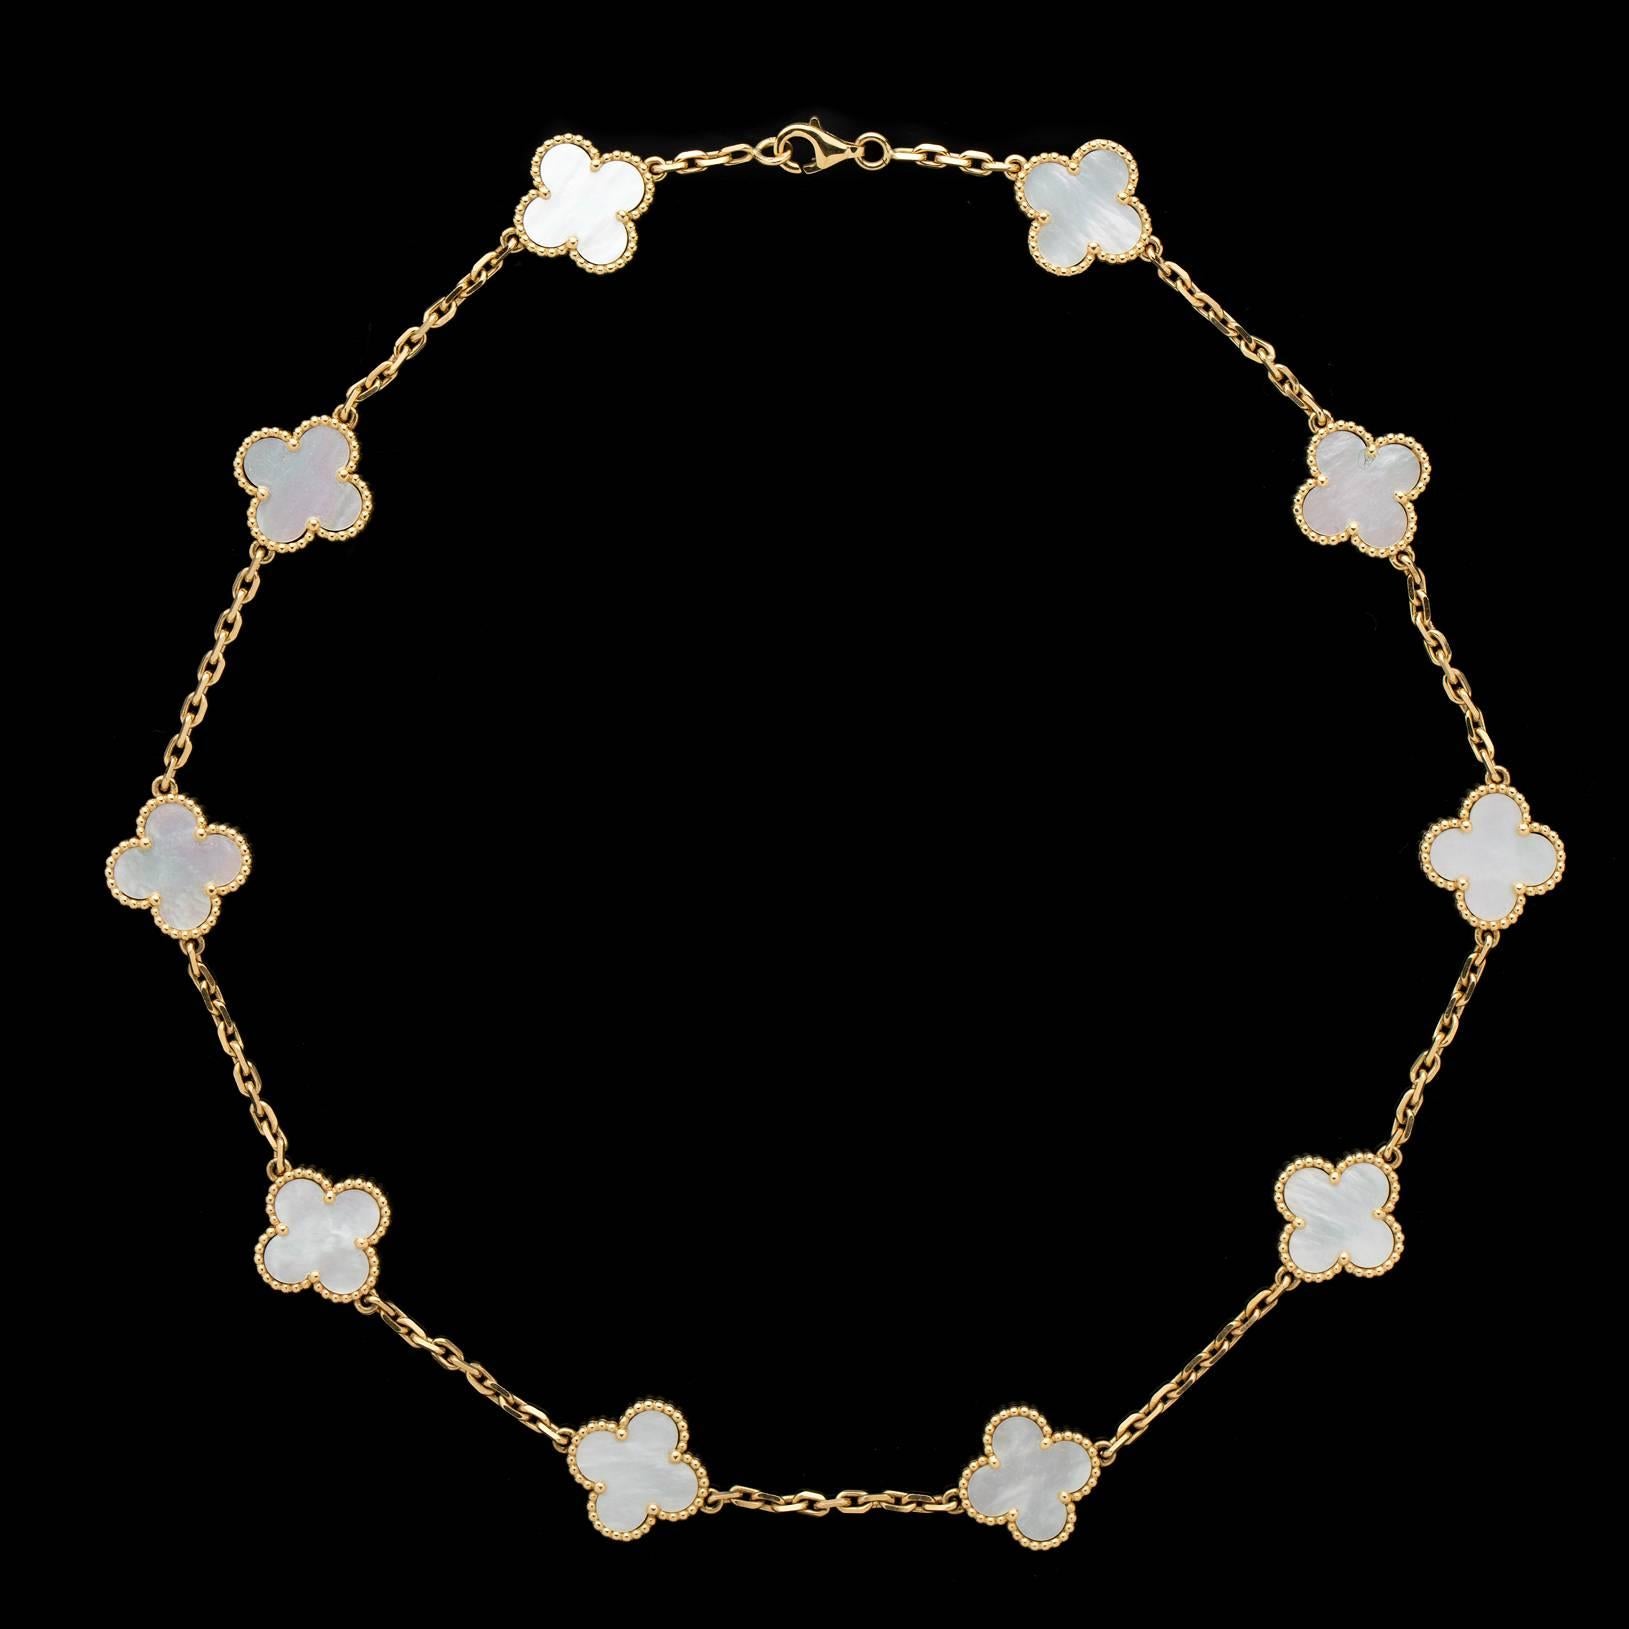 Van Cleef & Arpels iconic Alhambra 16 inch gold link necklace with 10 mother of pearl clover motifs. The clover each measures 14.6 x 14.5mm. Total weight of the necklace is 25.2 grams. Original packaging included. This VCA Alhambra necklace is a